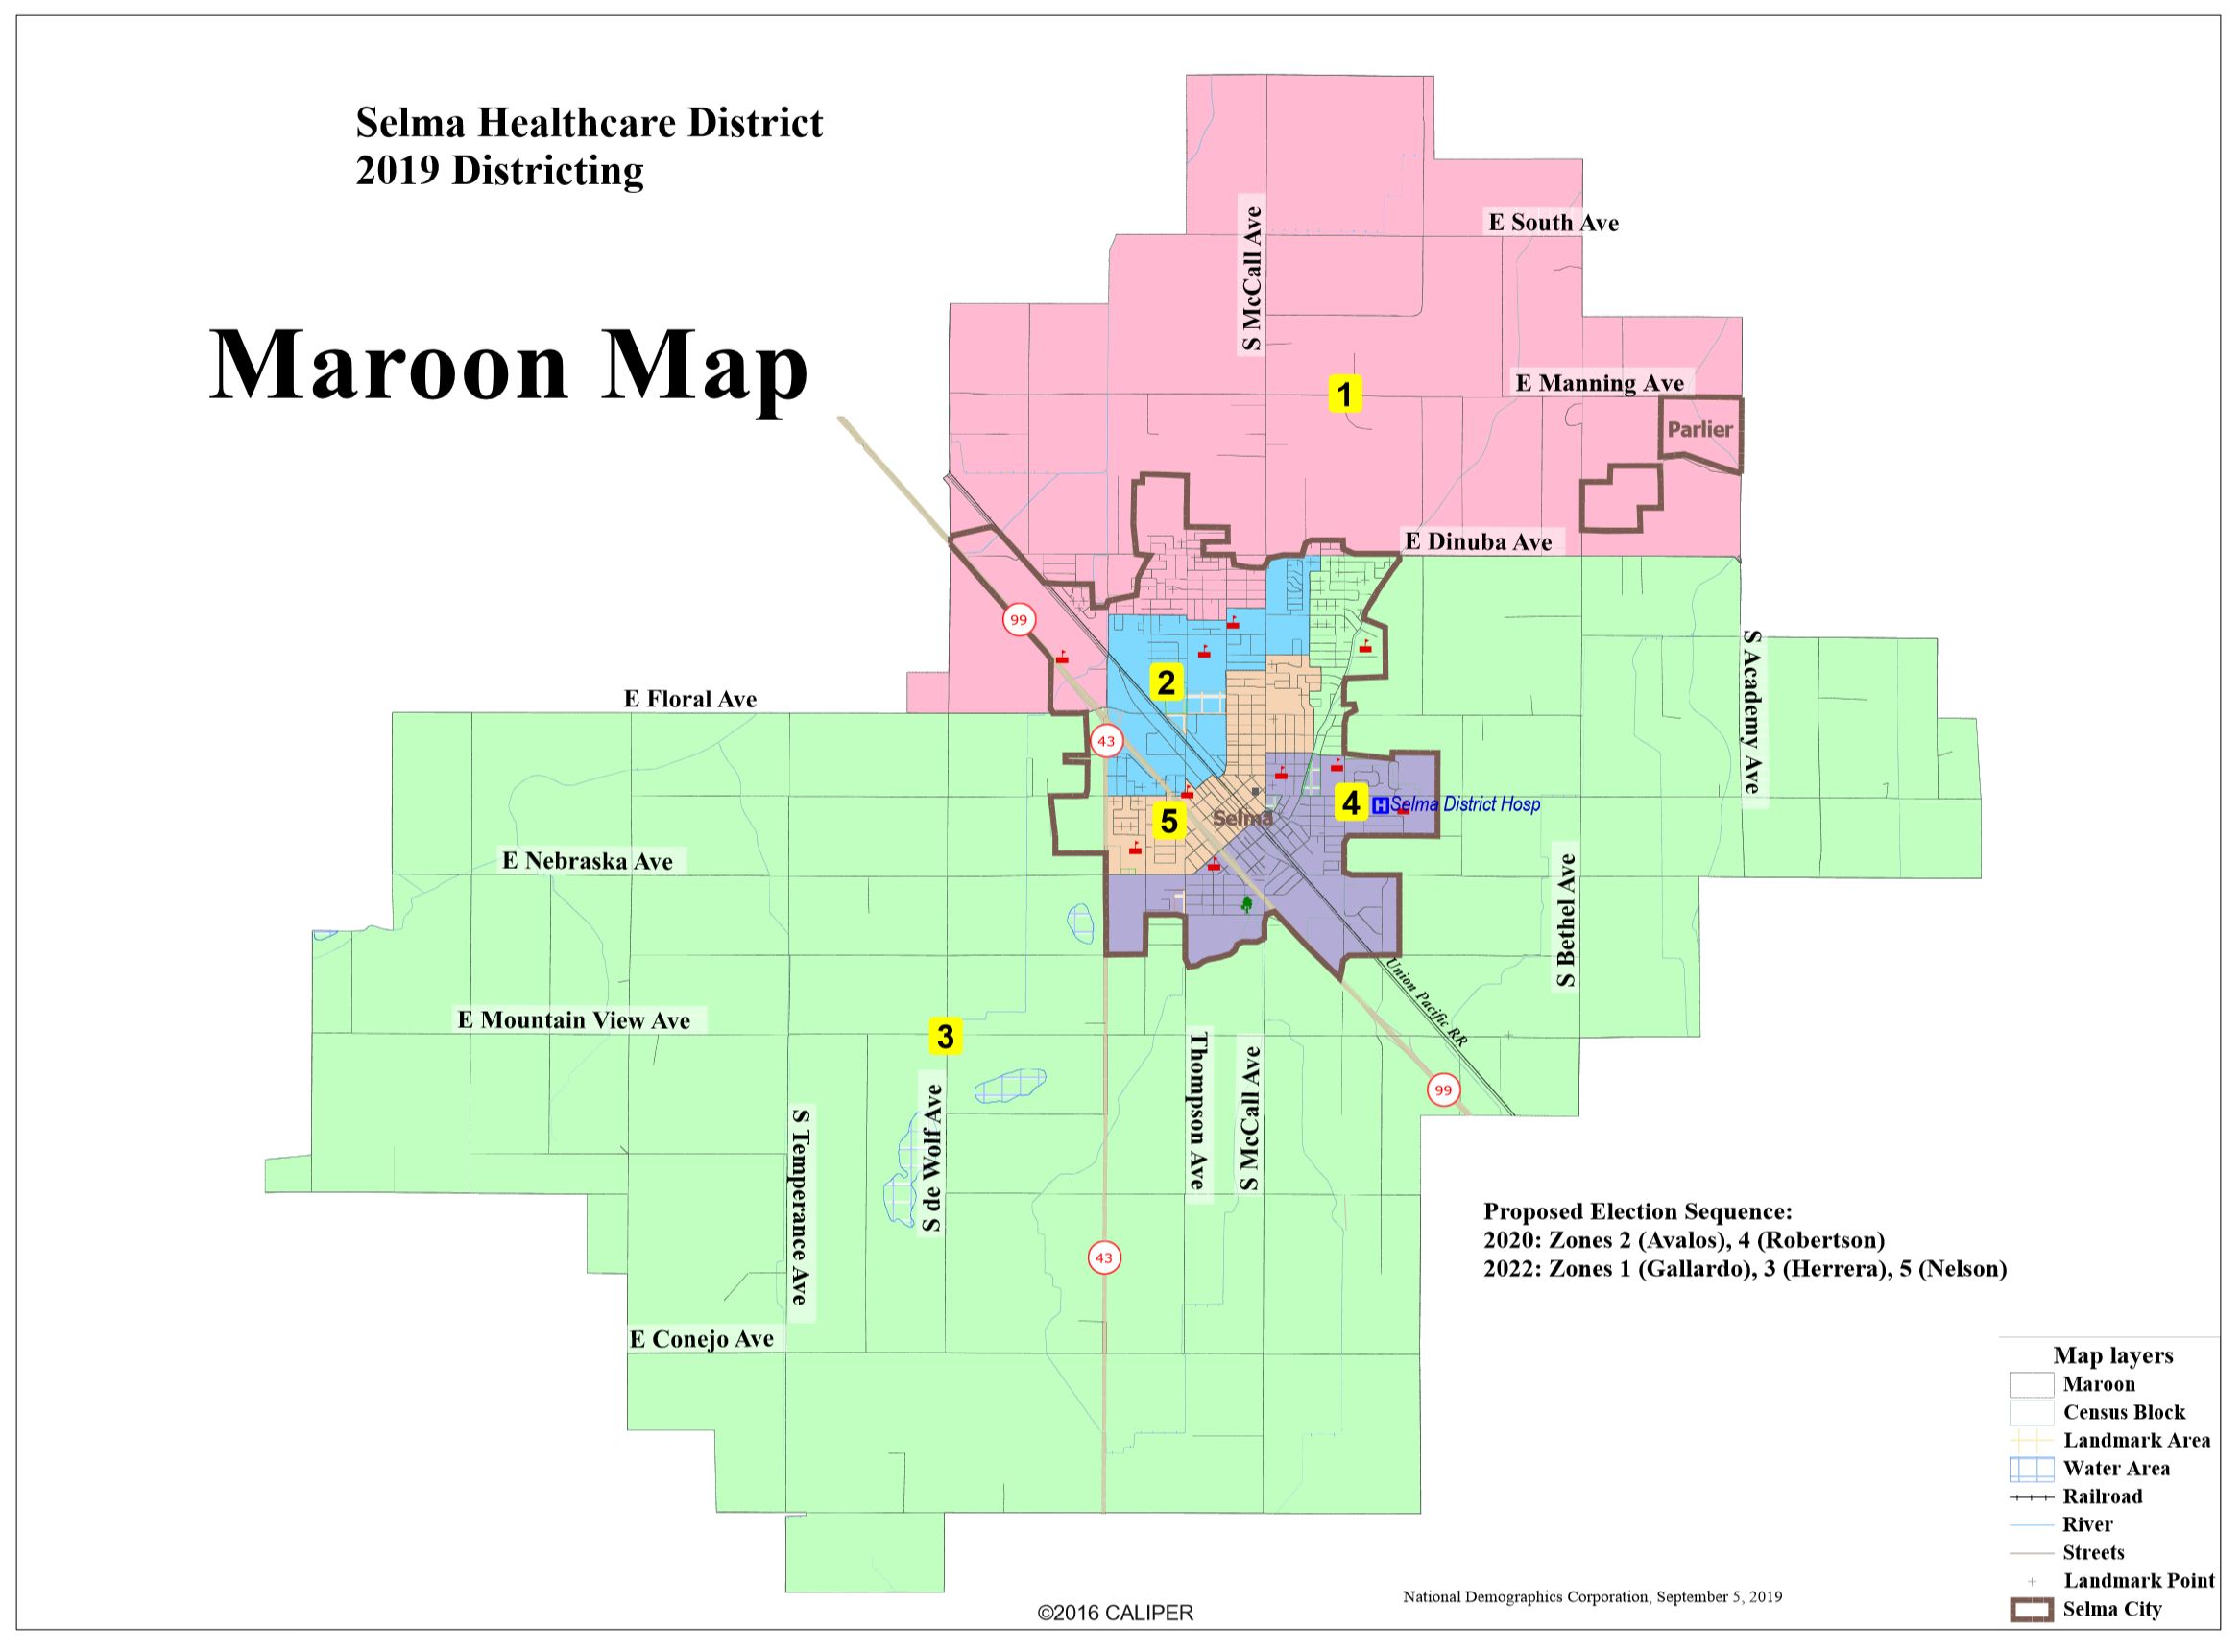 https://selmahealthcaredistrict.org/wp-content/uploads/2019/09/maroon_map_page_1_of_3.jpg